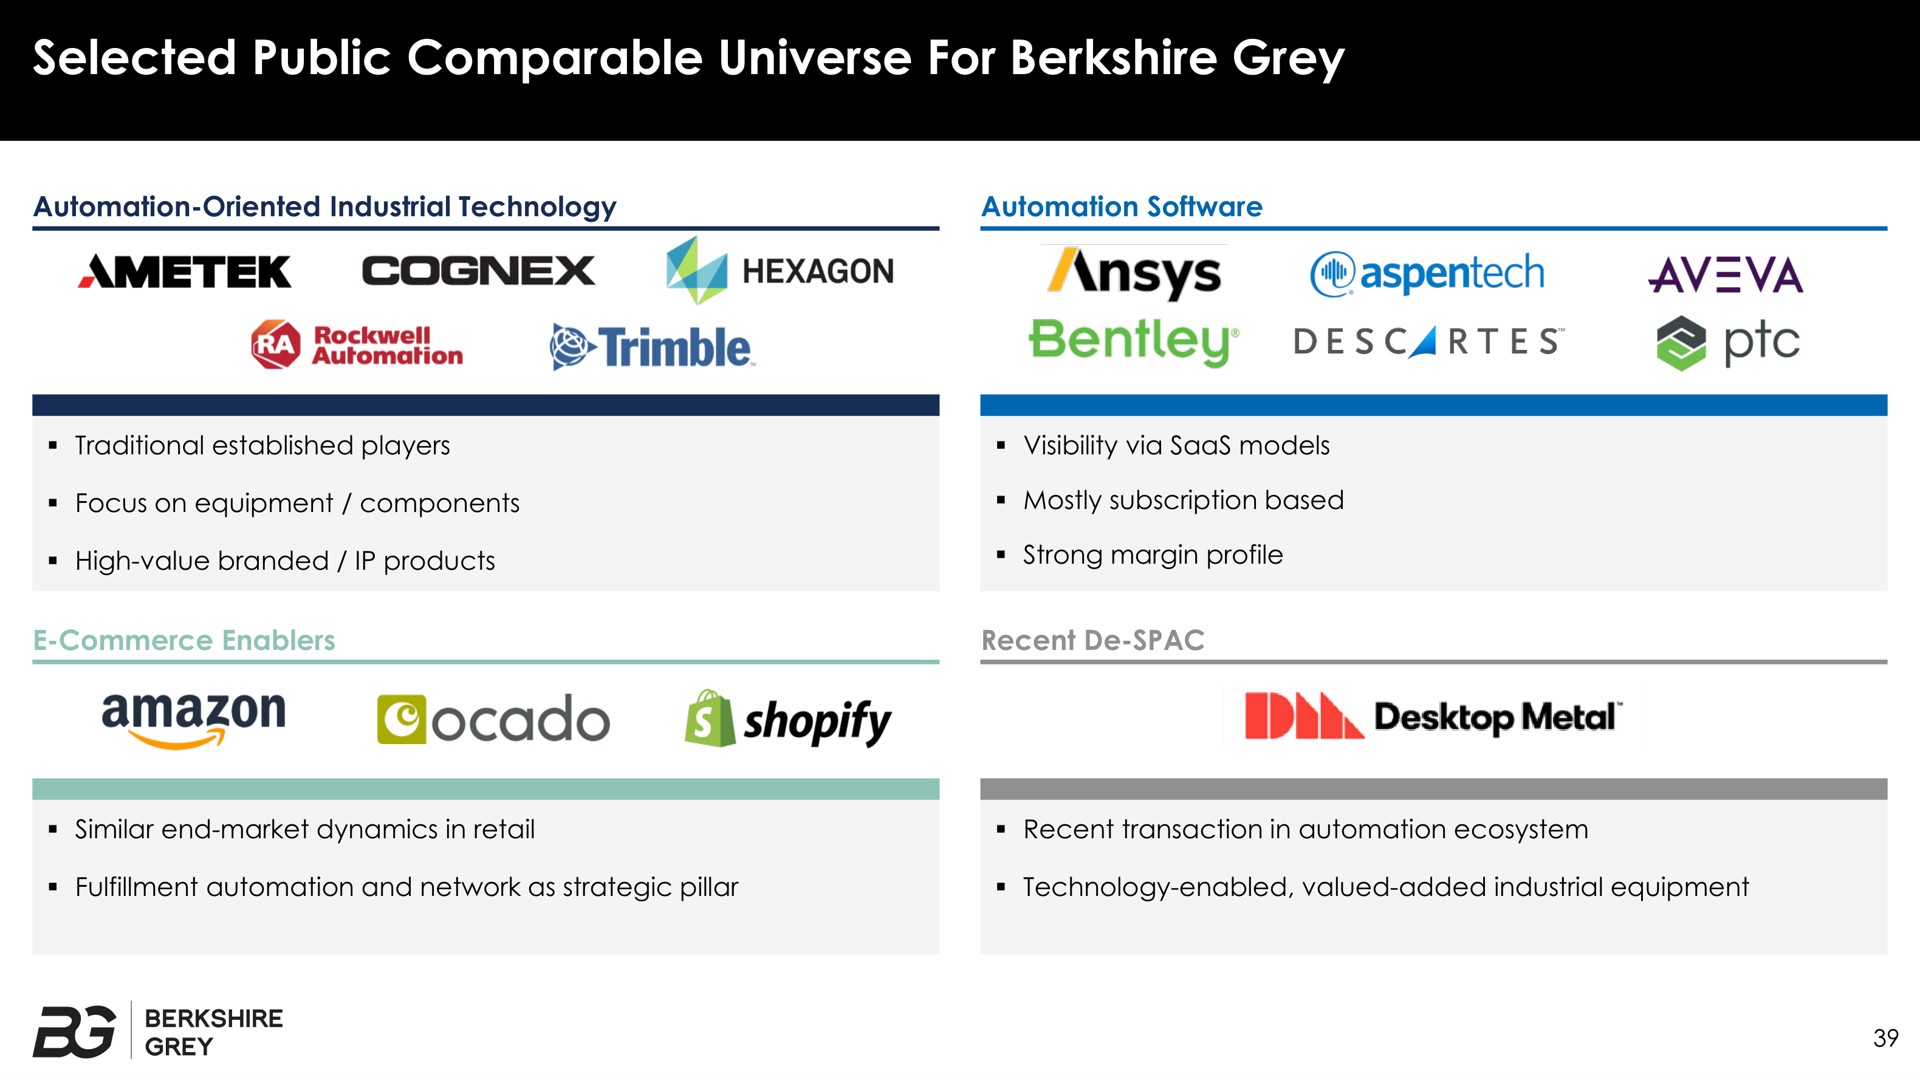 selected public comparable universe for grey | Berkshire Grey